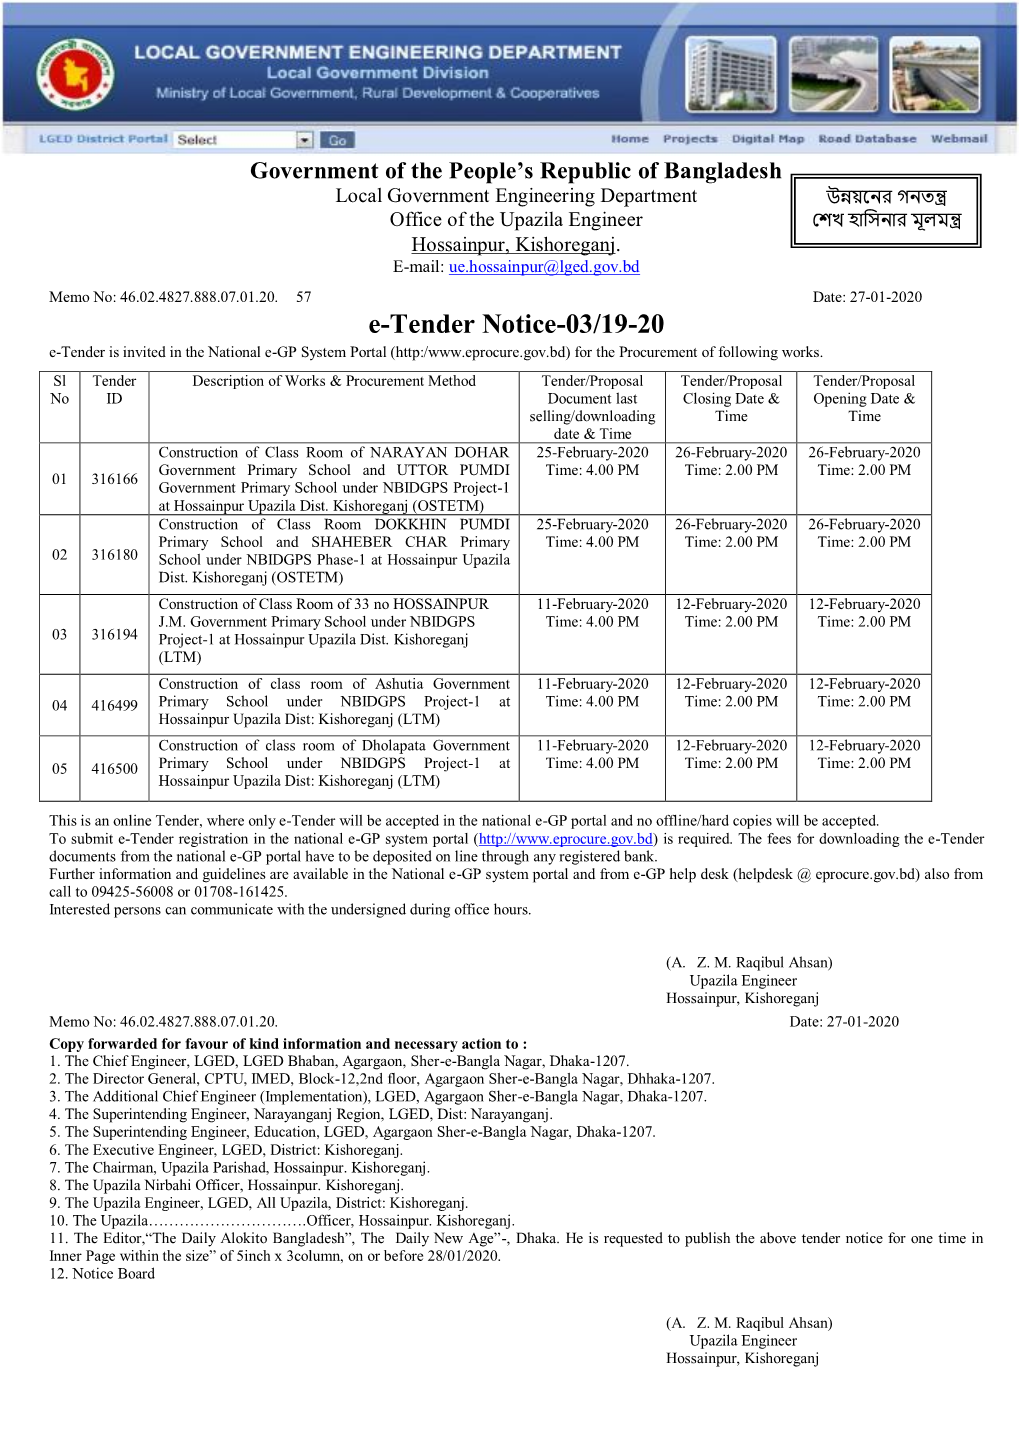 E-Tender Notice-03/19-20 E-Tender Is Invited in the National E-GP System Portal (Http:/ for the Procurement of Following Works